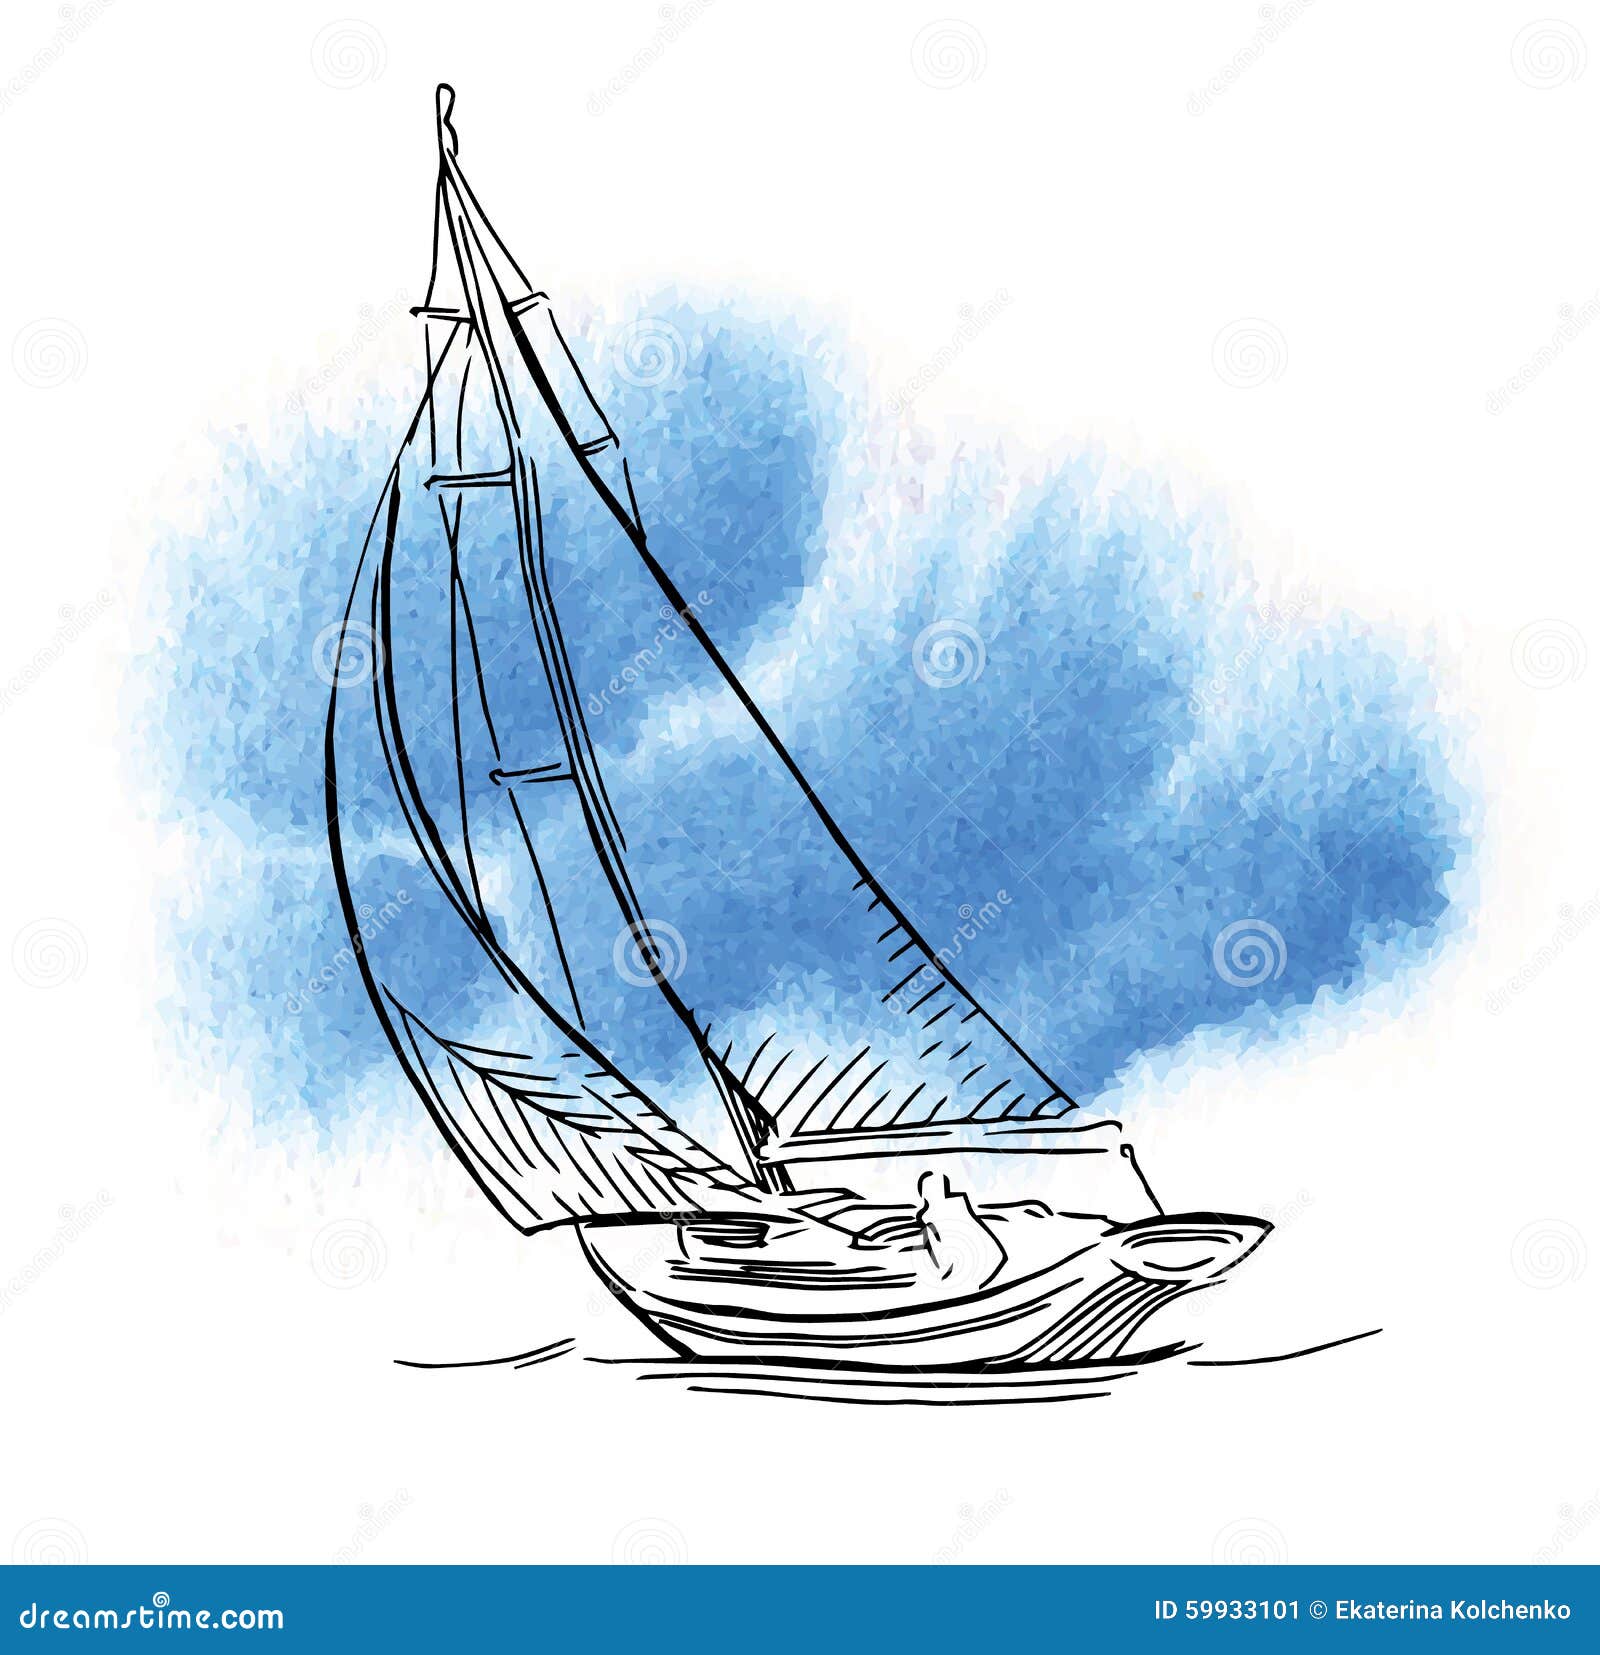 hand made sketch of yachting and sea.